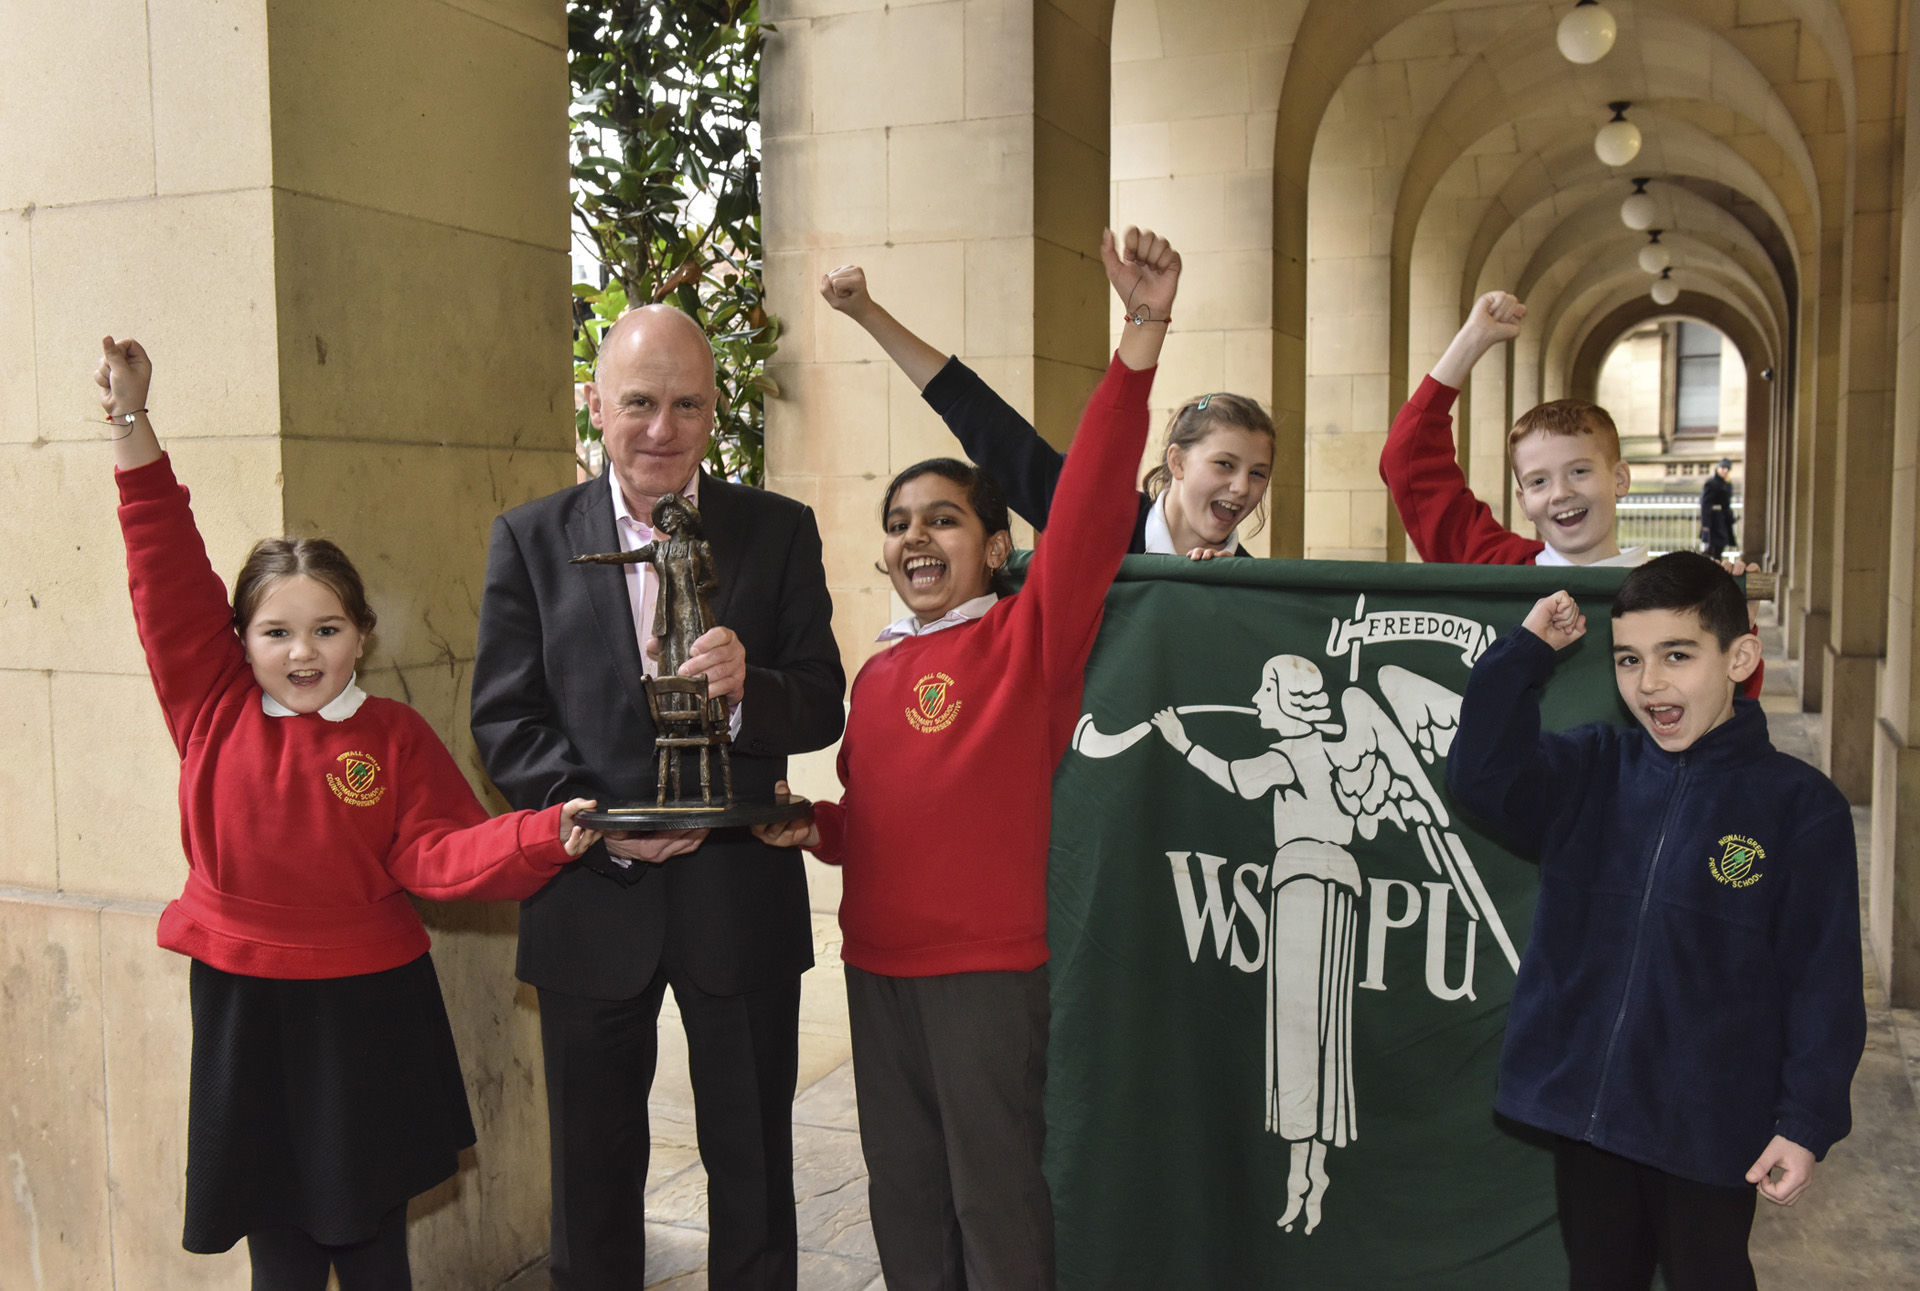 Andrew Simcock, Fatima Shahid & pupils from Newall Green Primary School